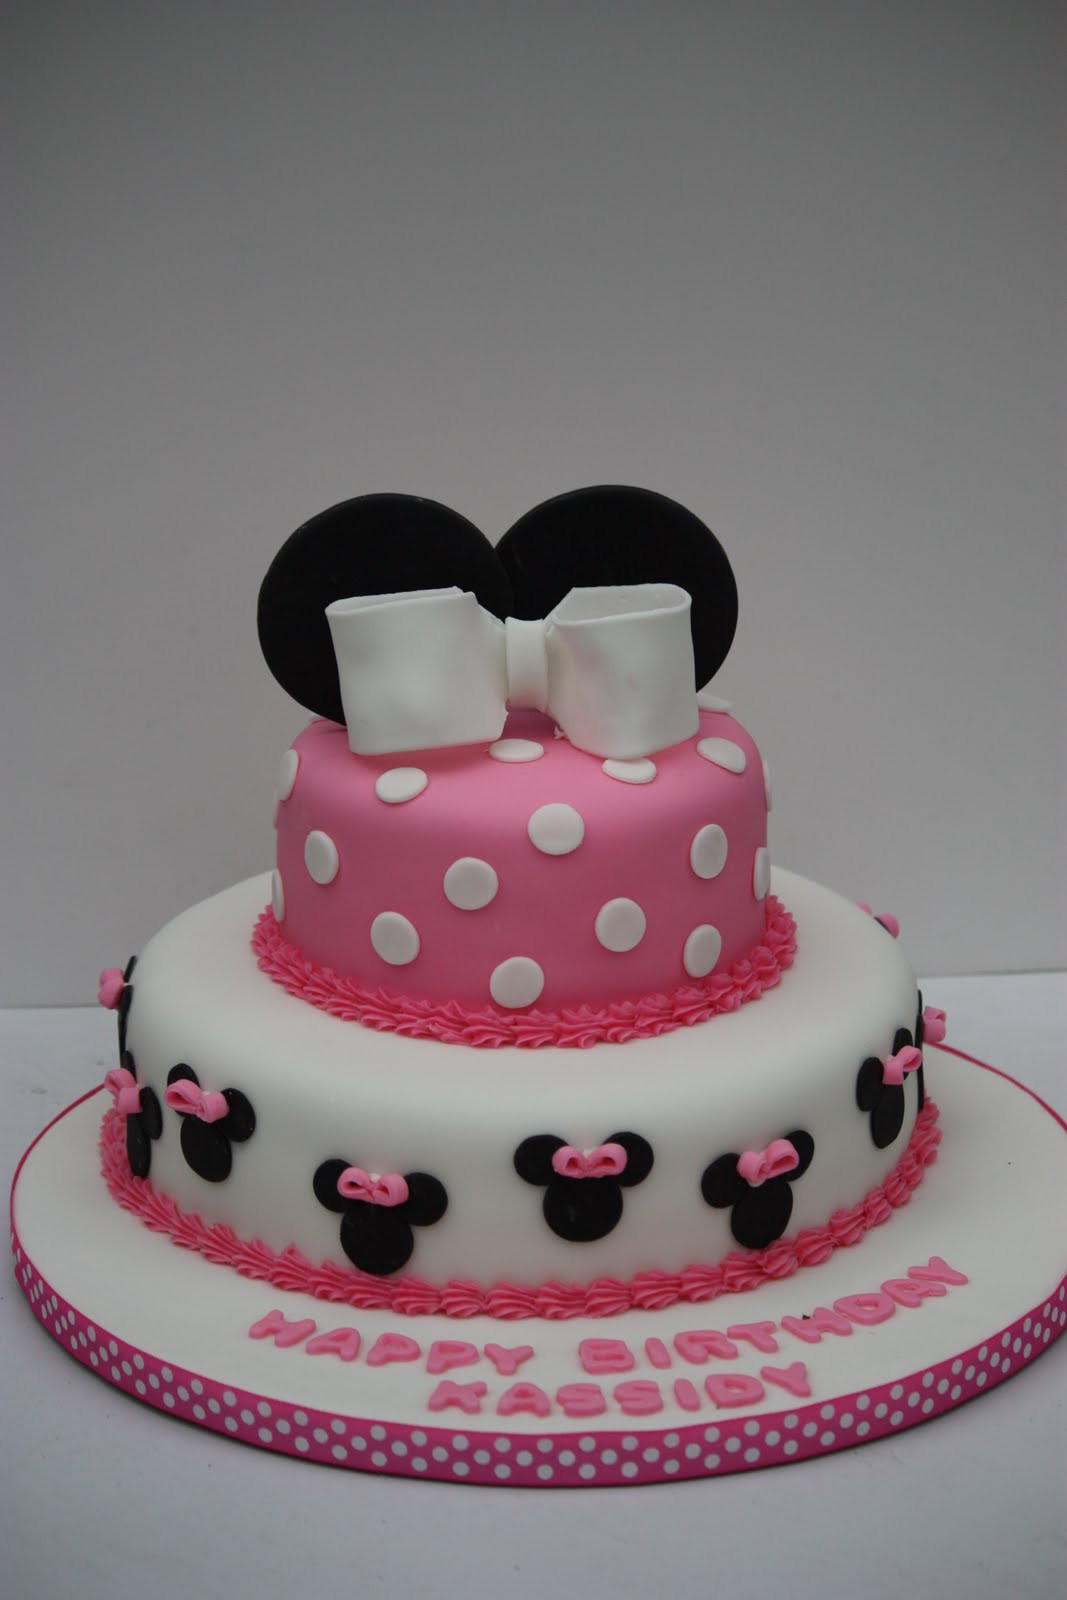 Minnie Mouse Birthday Cake
 Whimsical by Design Minnie Mouse Birthday Cake